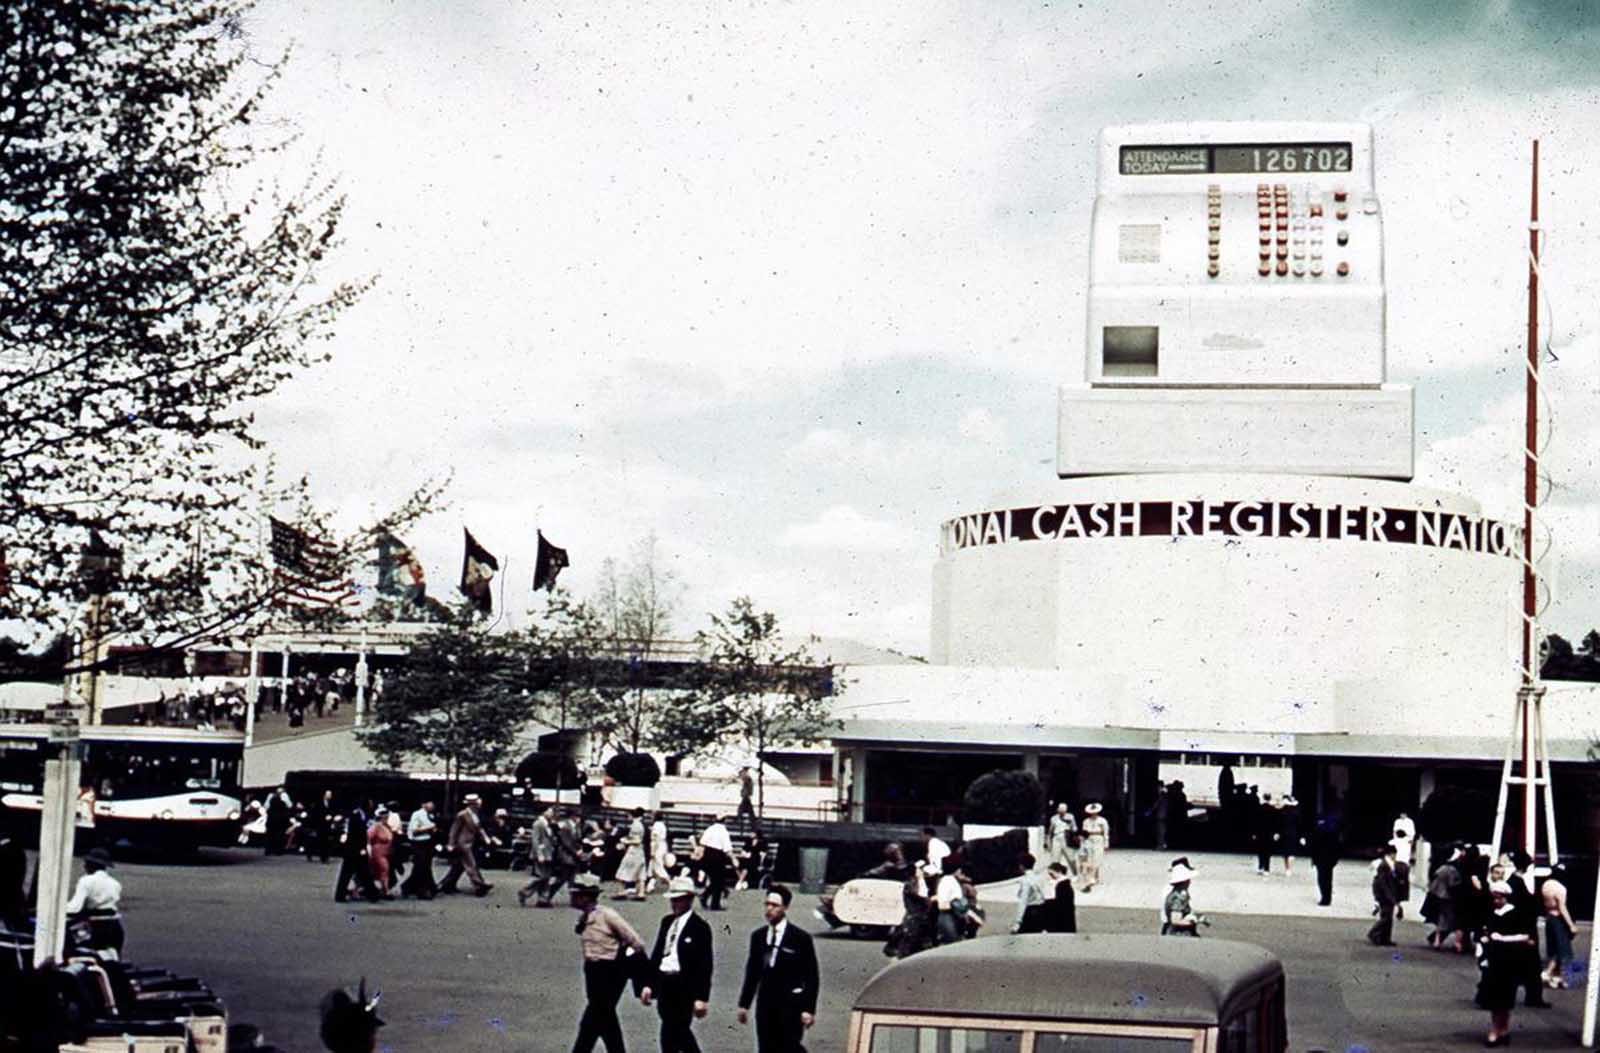 The National Cash Register Building at the 1939 New York World's Fair.